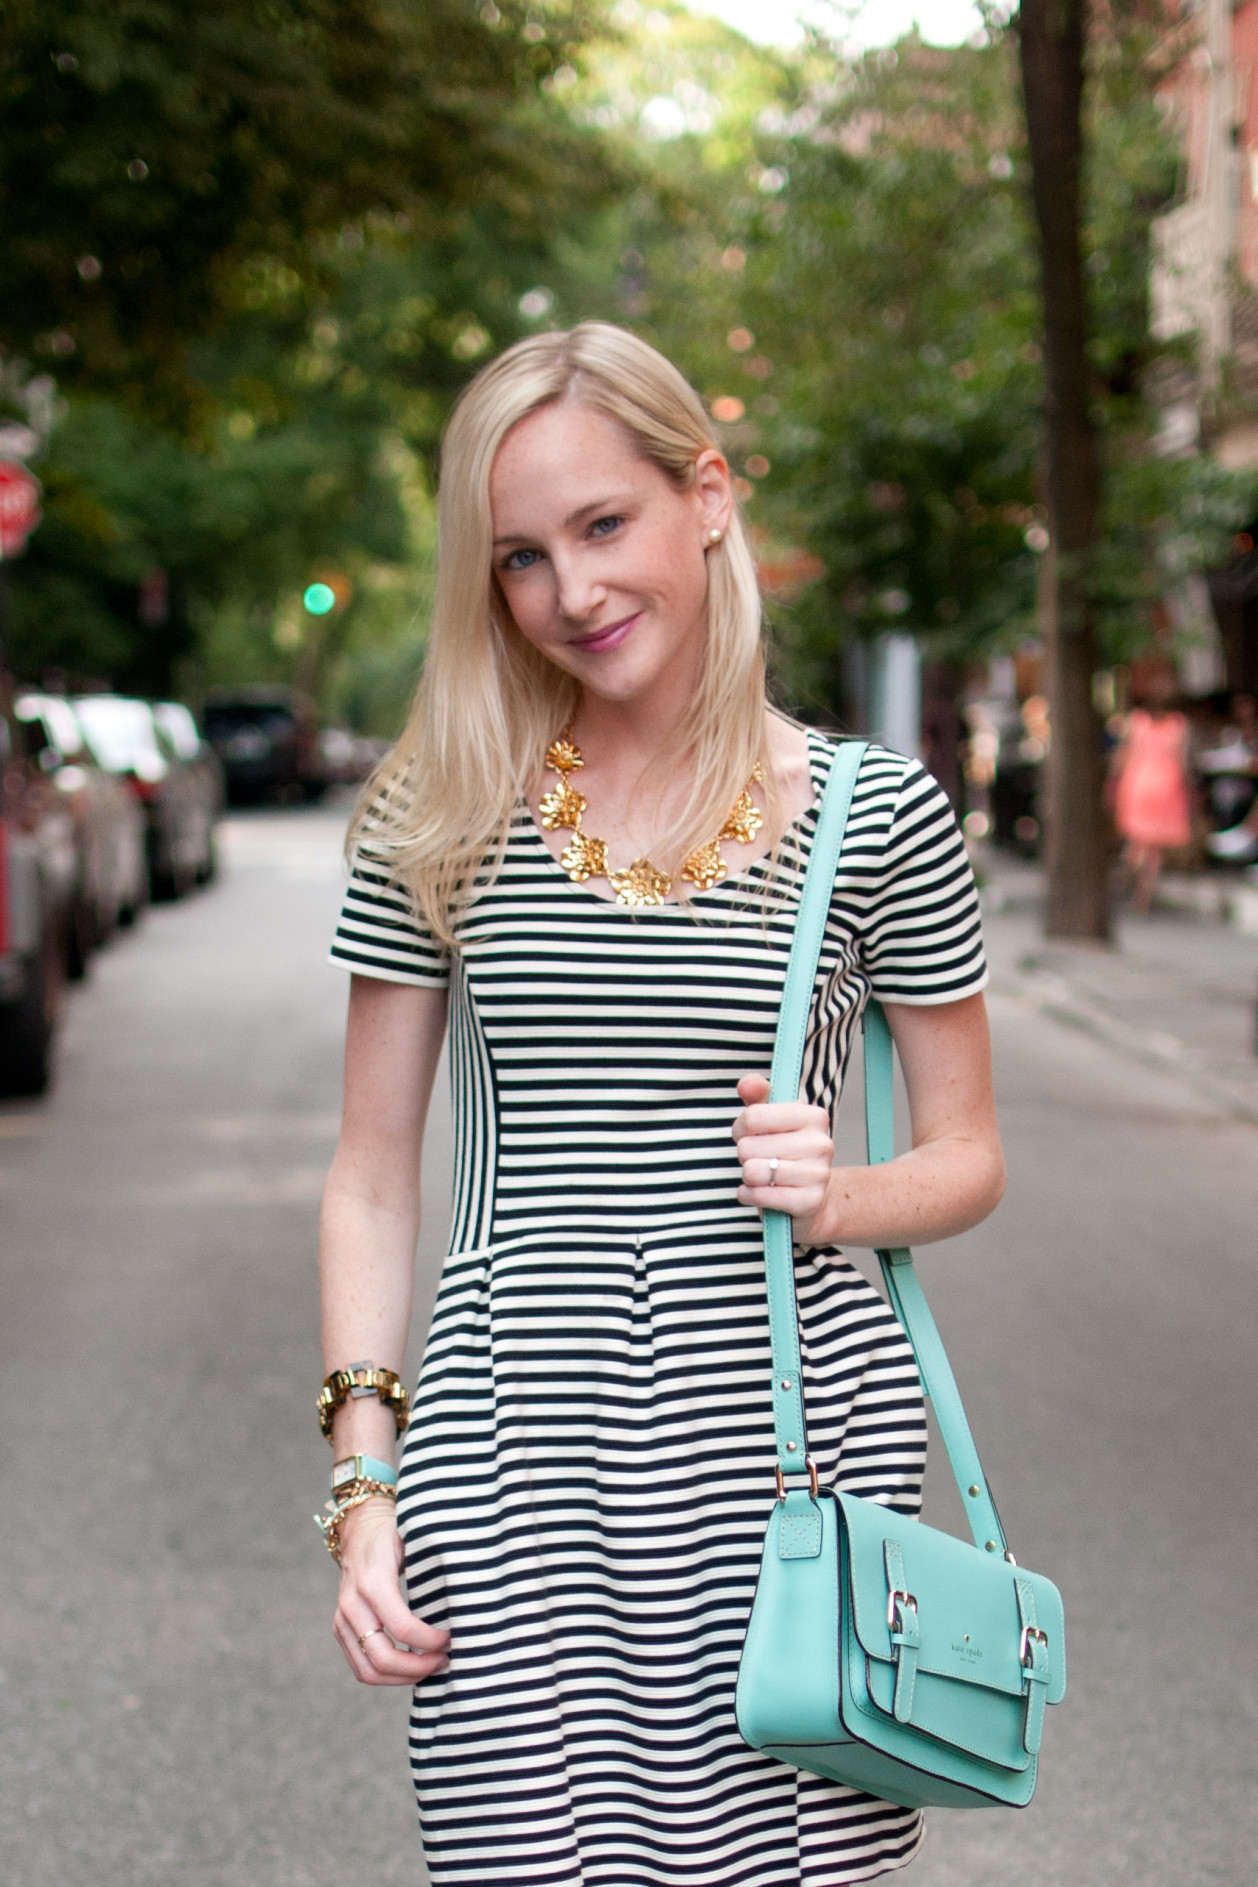 Striped Dresses, Turquoise Bags and Gold Accents for a Going Away Party